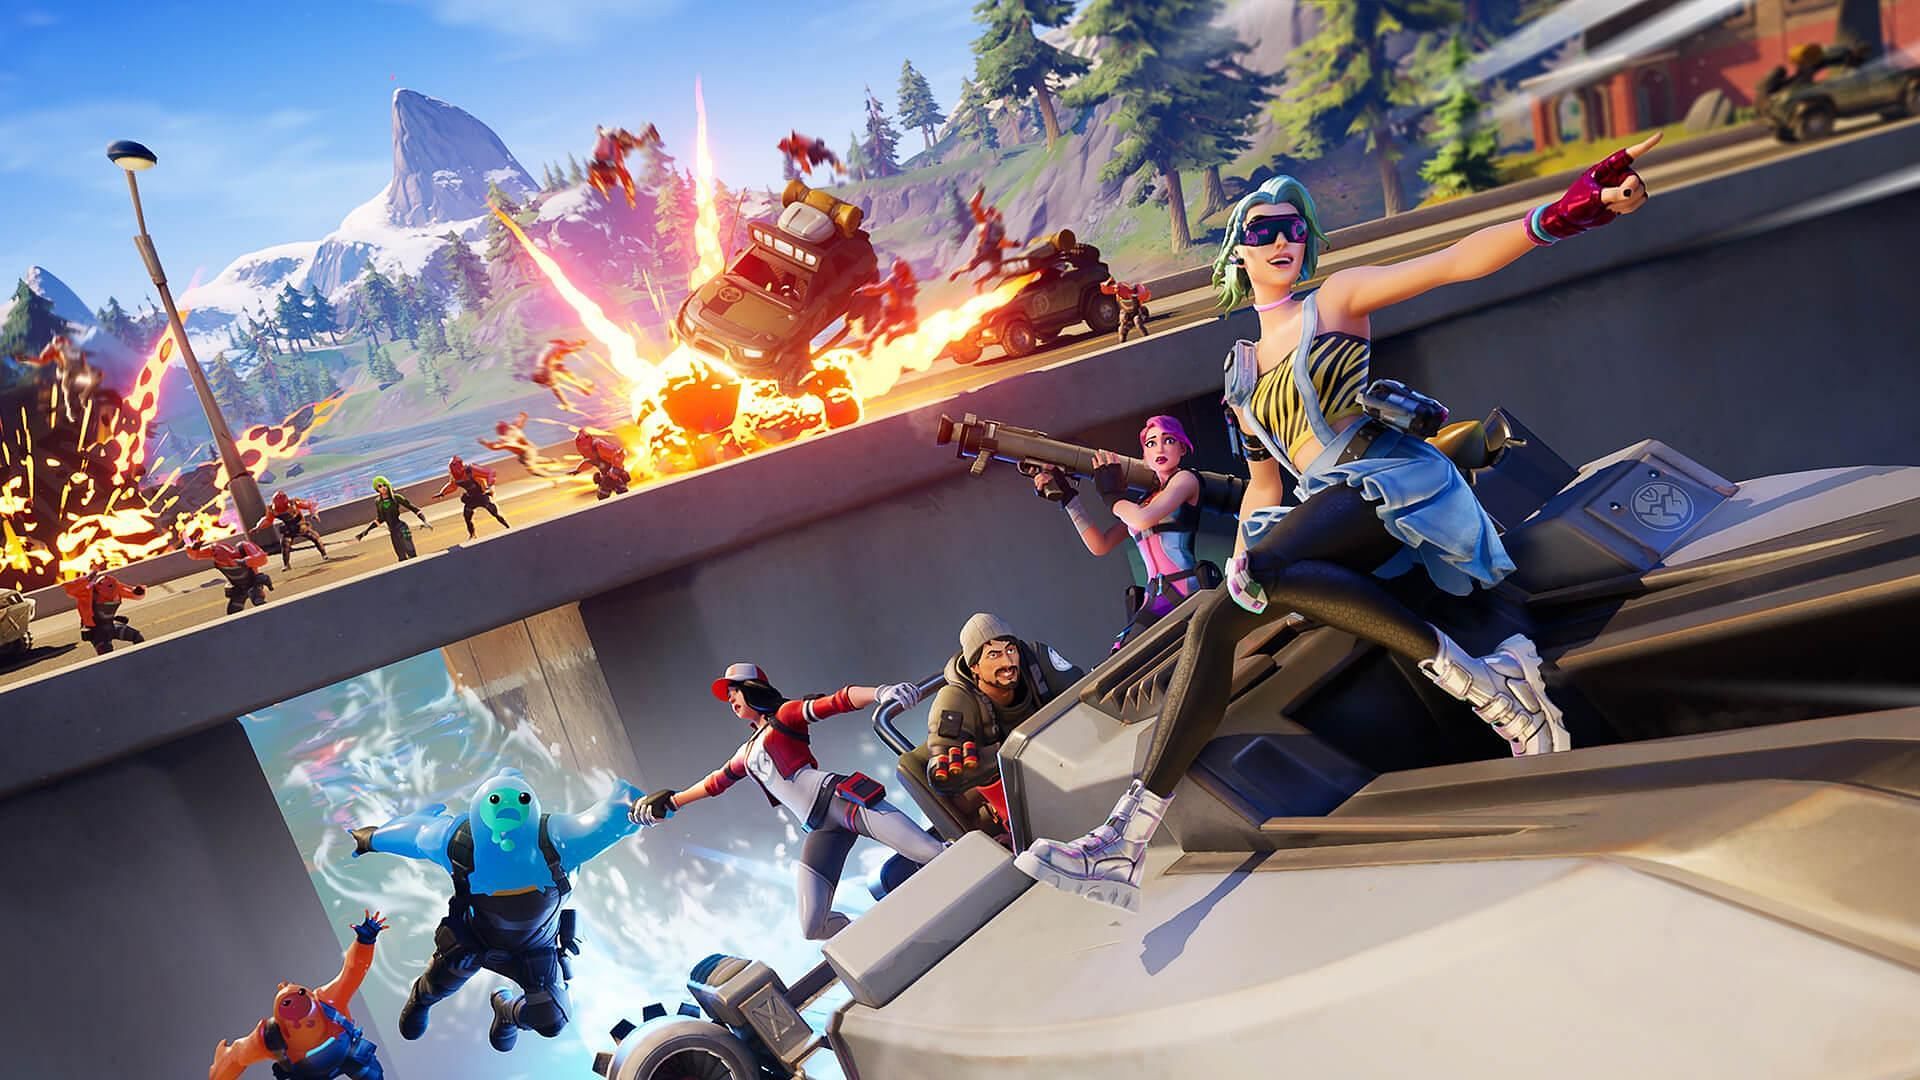 Players can fall to their death in Fortnite (Image via Epic Games)